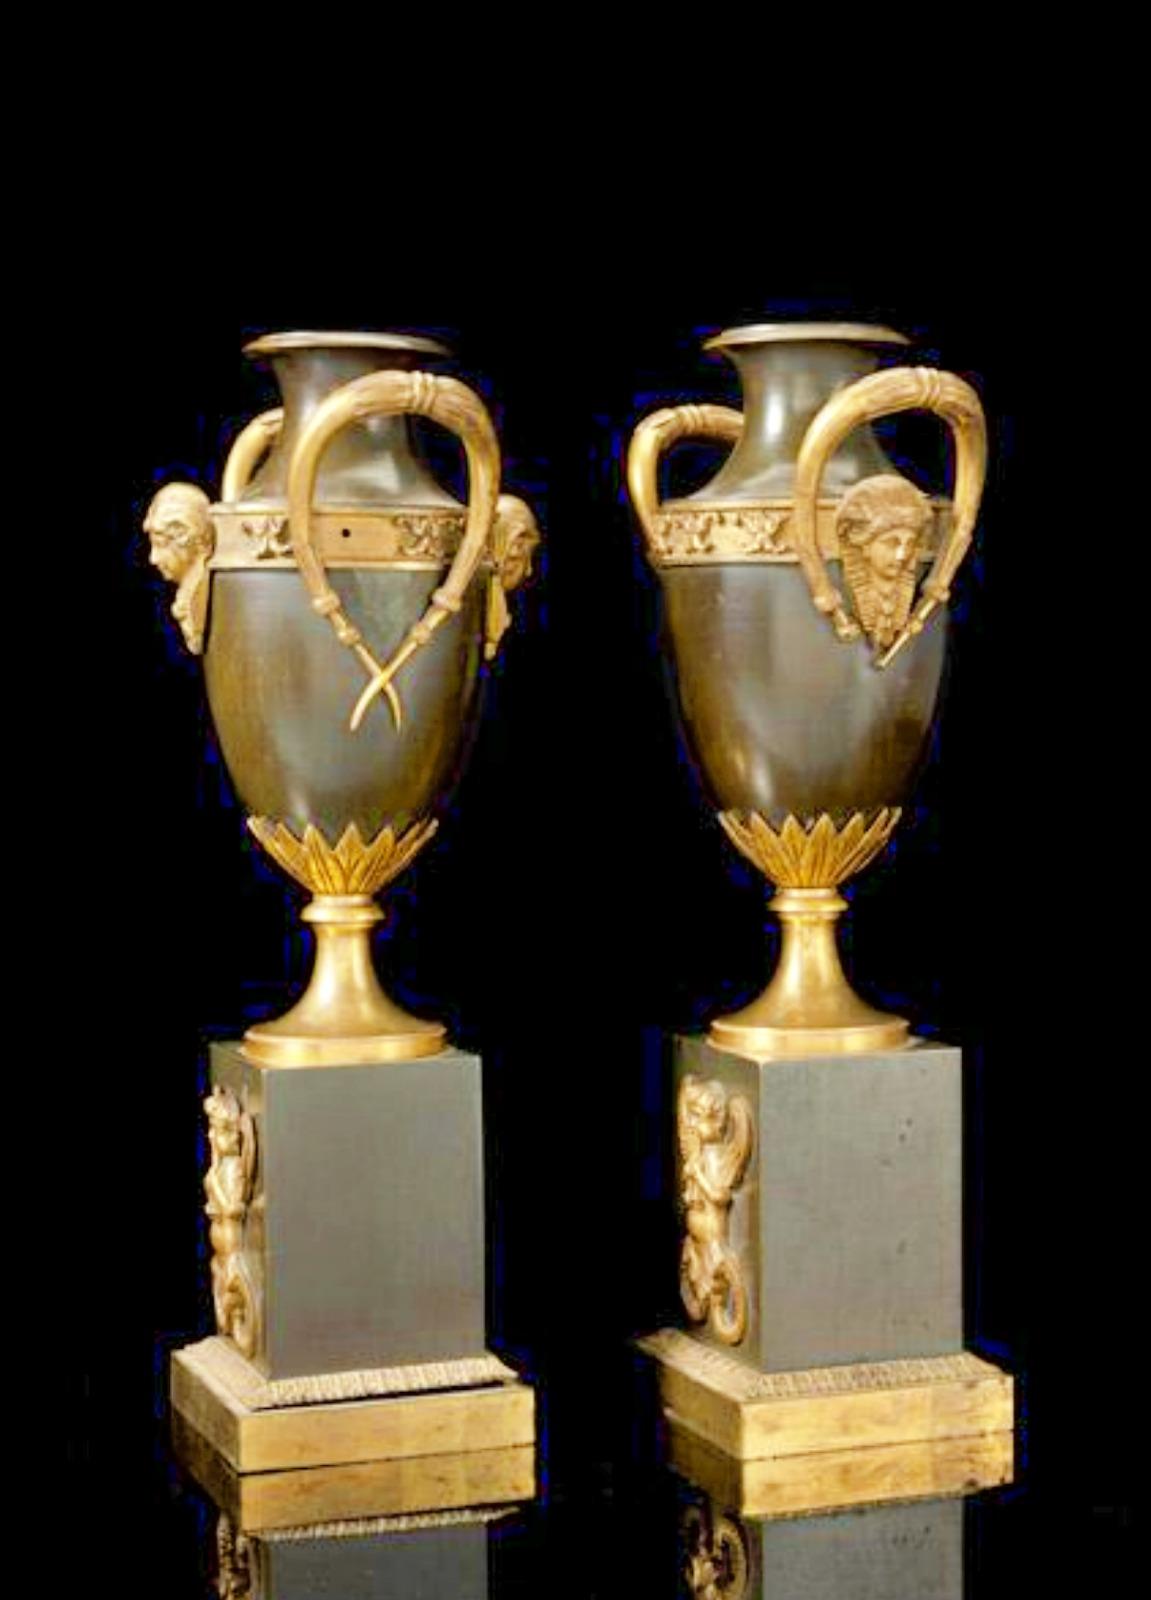 A PAIR OF NEOCLASSICAL GILT AND PATINATED BRONZE CASSOLETTES 19th century
French, 1st quarter of 19th century
H. 30 cm
On rectangular base with applied winged putto heads two Amphora vases, mounted with gilt bronze leaves and sphinx heads.